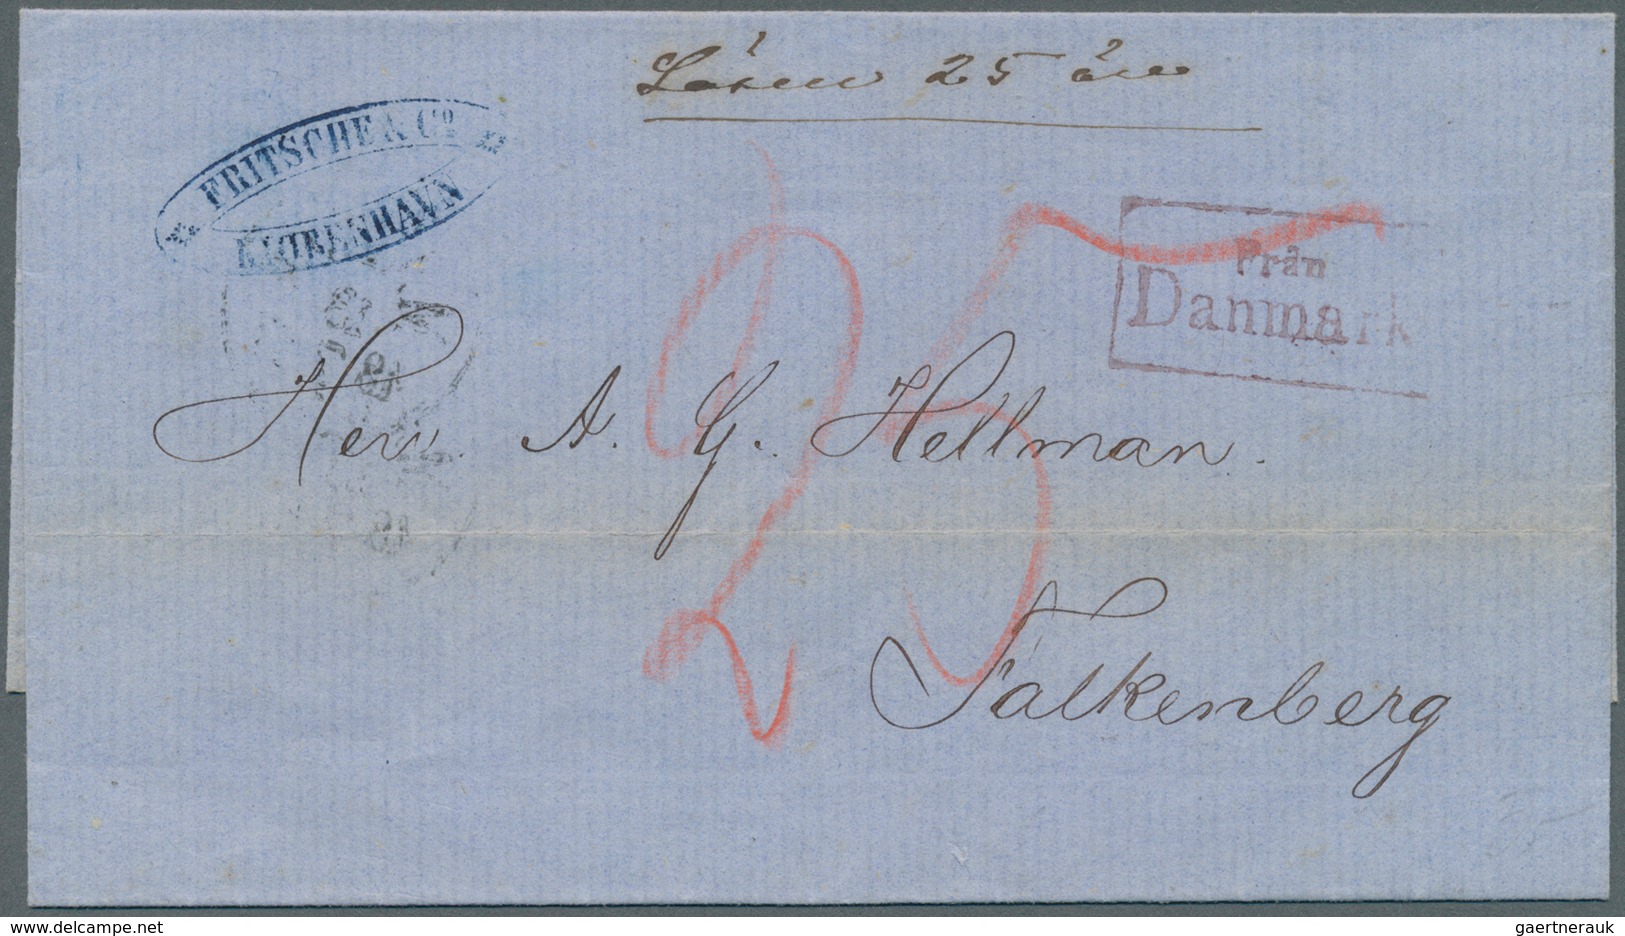 Schweden: 1867, "FRAN DANMARK", Boxed VIOLET Ship Mail Arrival Marking On Entire Letter From Copenha - Neufs